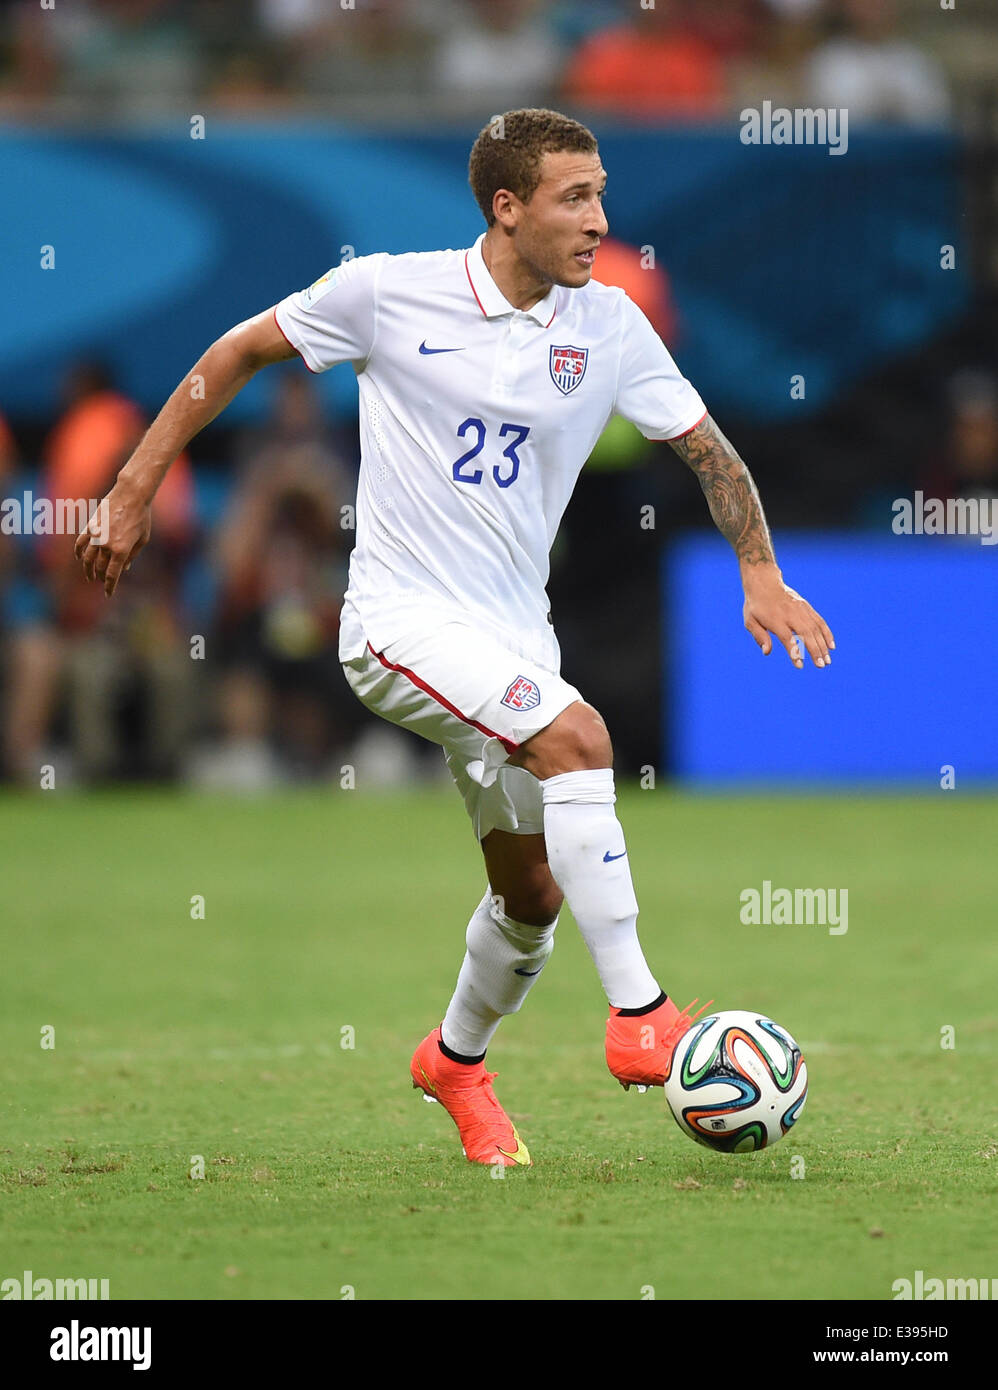 Manaus, Brazil. 22nd June, 2014. Fabian Johnson of USA in action during the FIFA World Cup 2014 group G preliminary round match between the USA and Portugal at the Arena Amazonia Stadium in Manaus, Brazil, 22 June 2014. Photo: Marius Becker/dpa/Alamy Live News Stock Photo